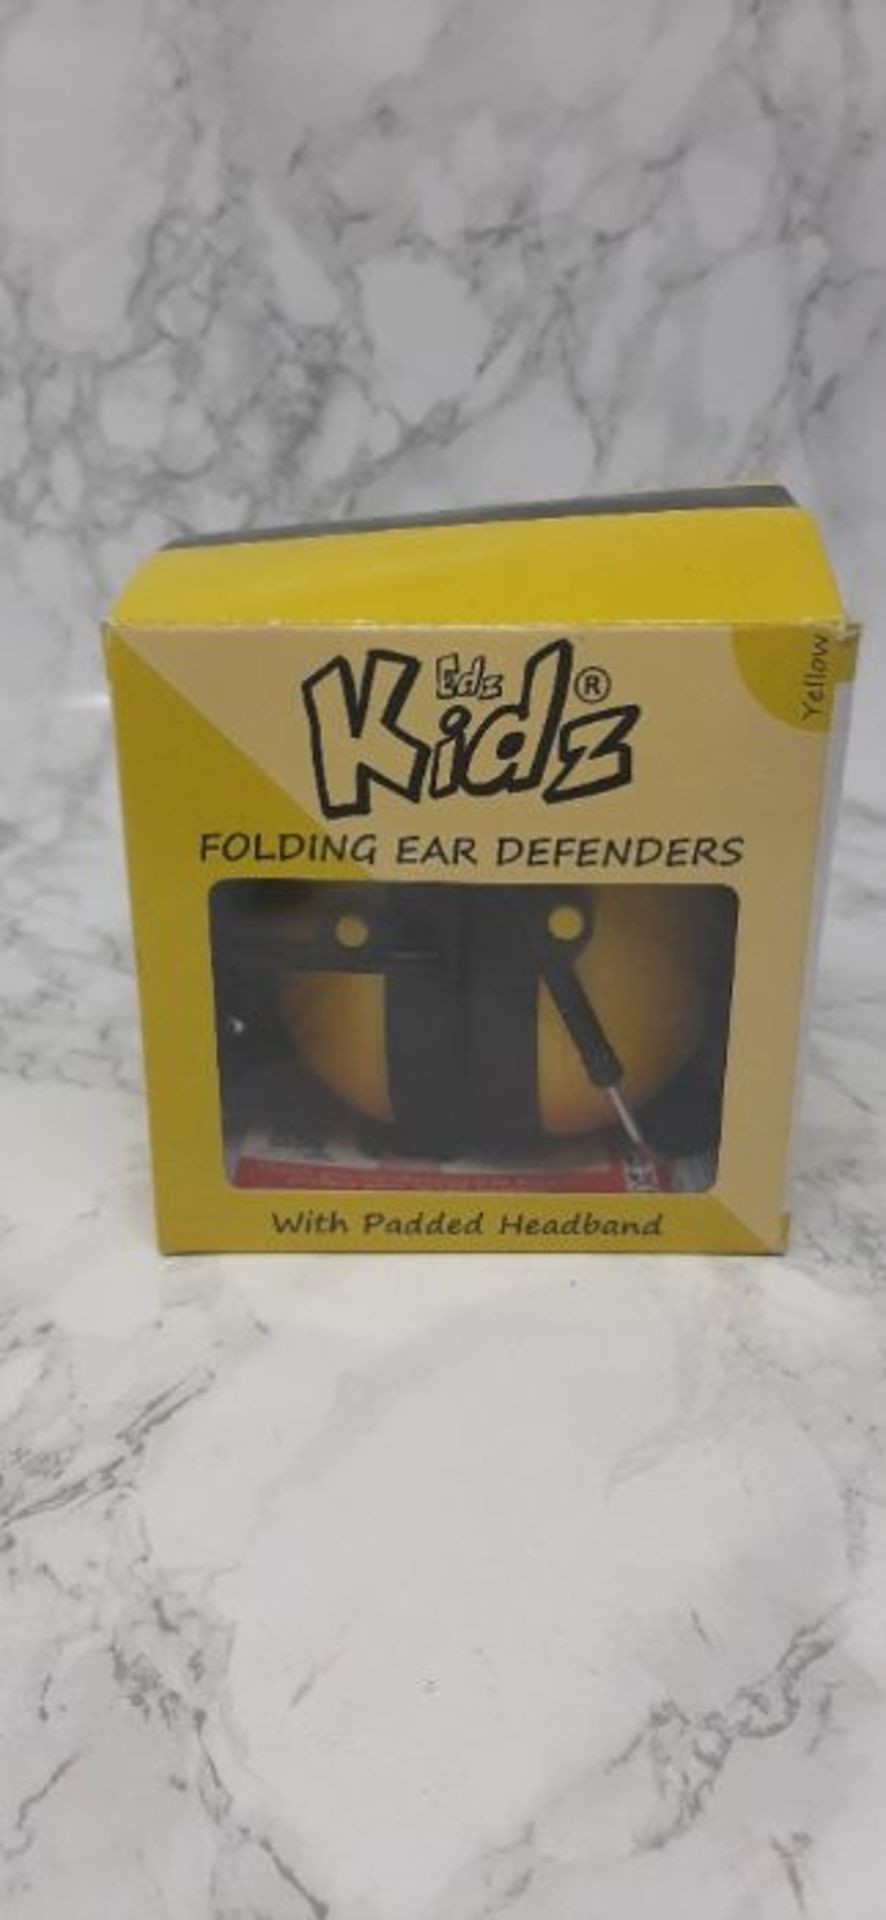 Edz Kidz Ear Defenders. Ear Protection for Toddlers Through Teens. (Yellow) - Image 3 of 3